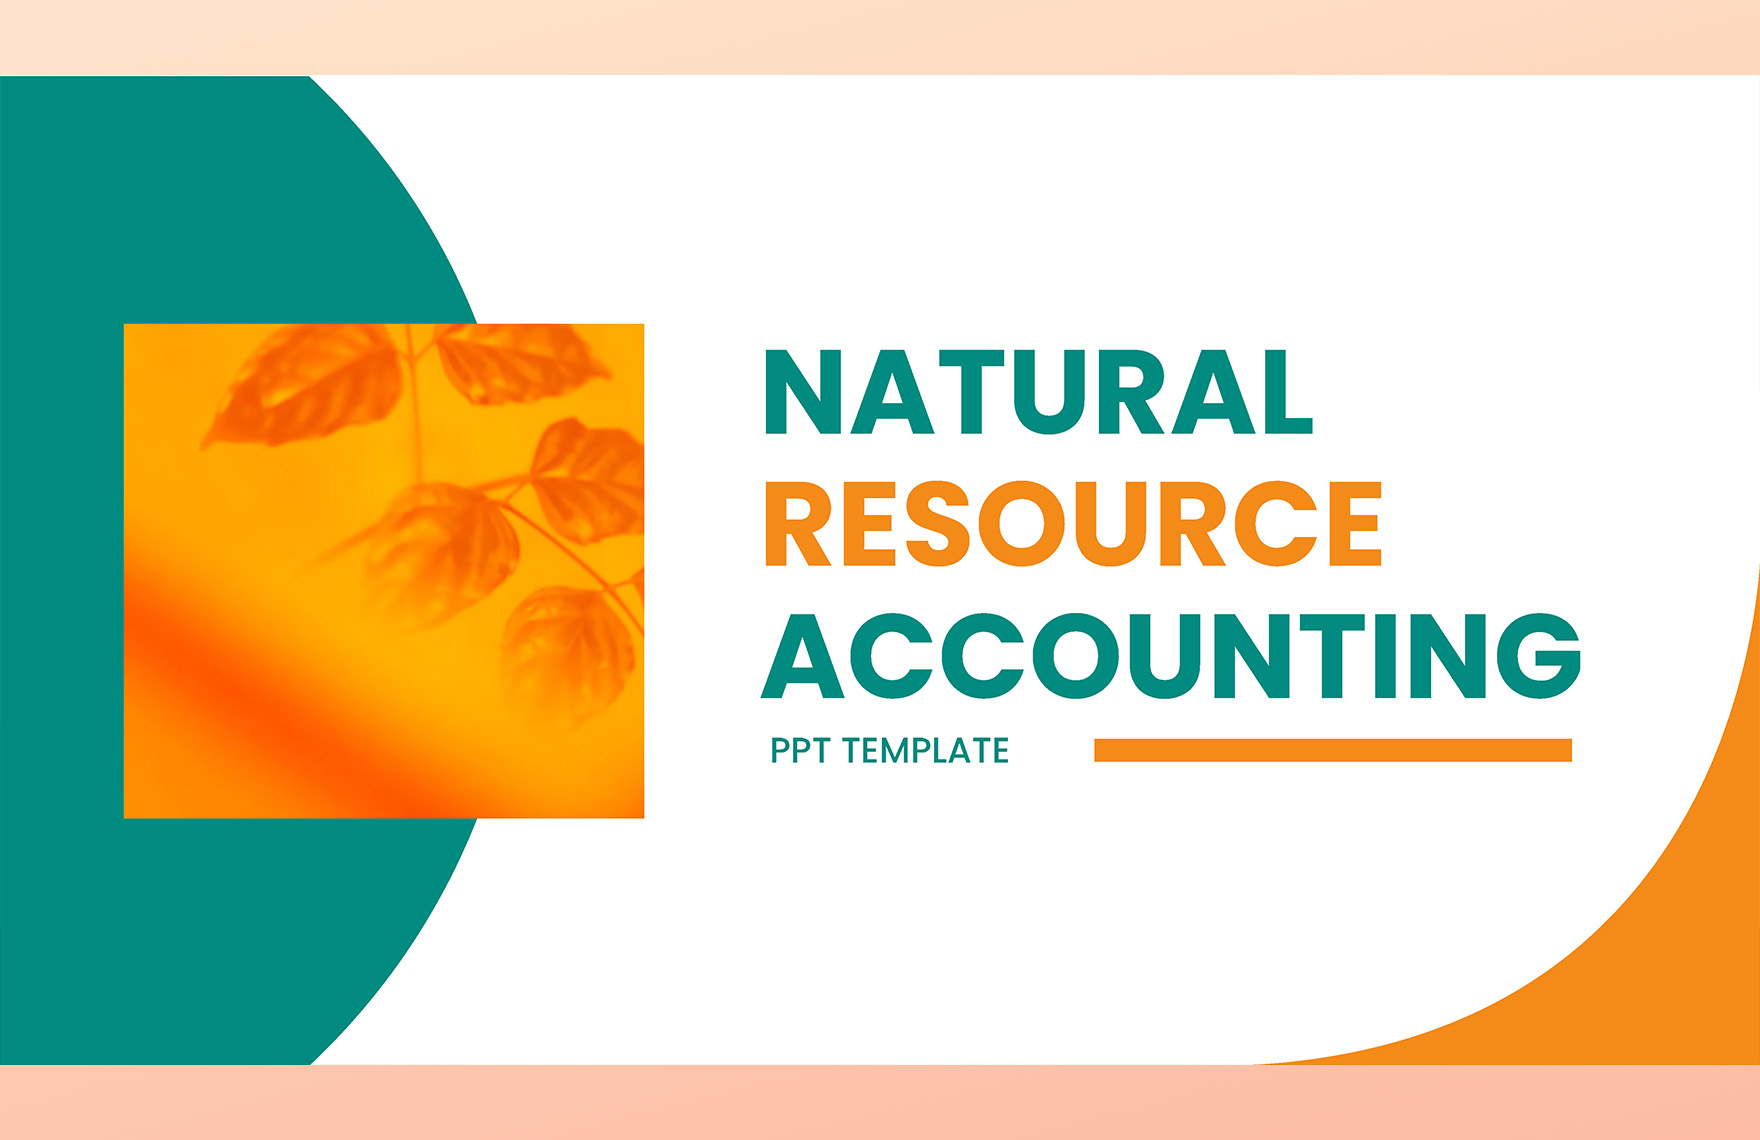 Natural Resource Accounting PPT Template